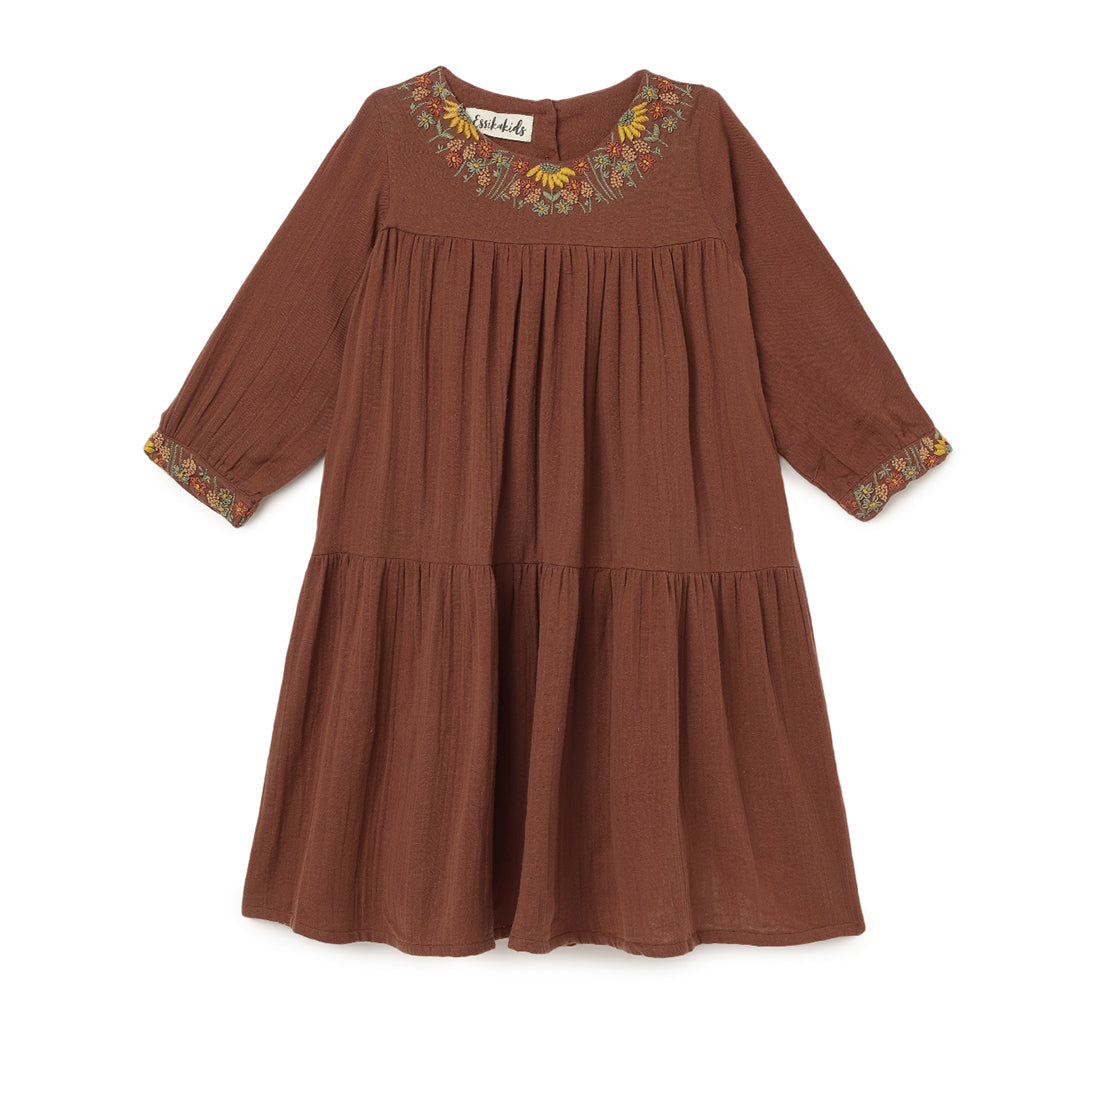 Girls Embroidered Cotton Dress Rust Brown - 1 yr to 8 yrs - Front